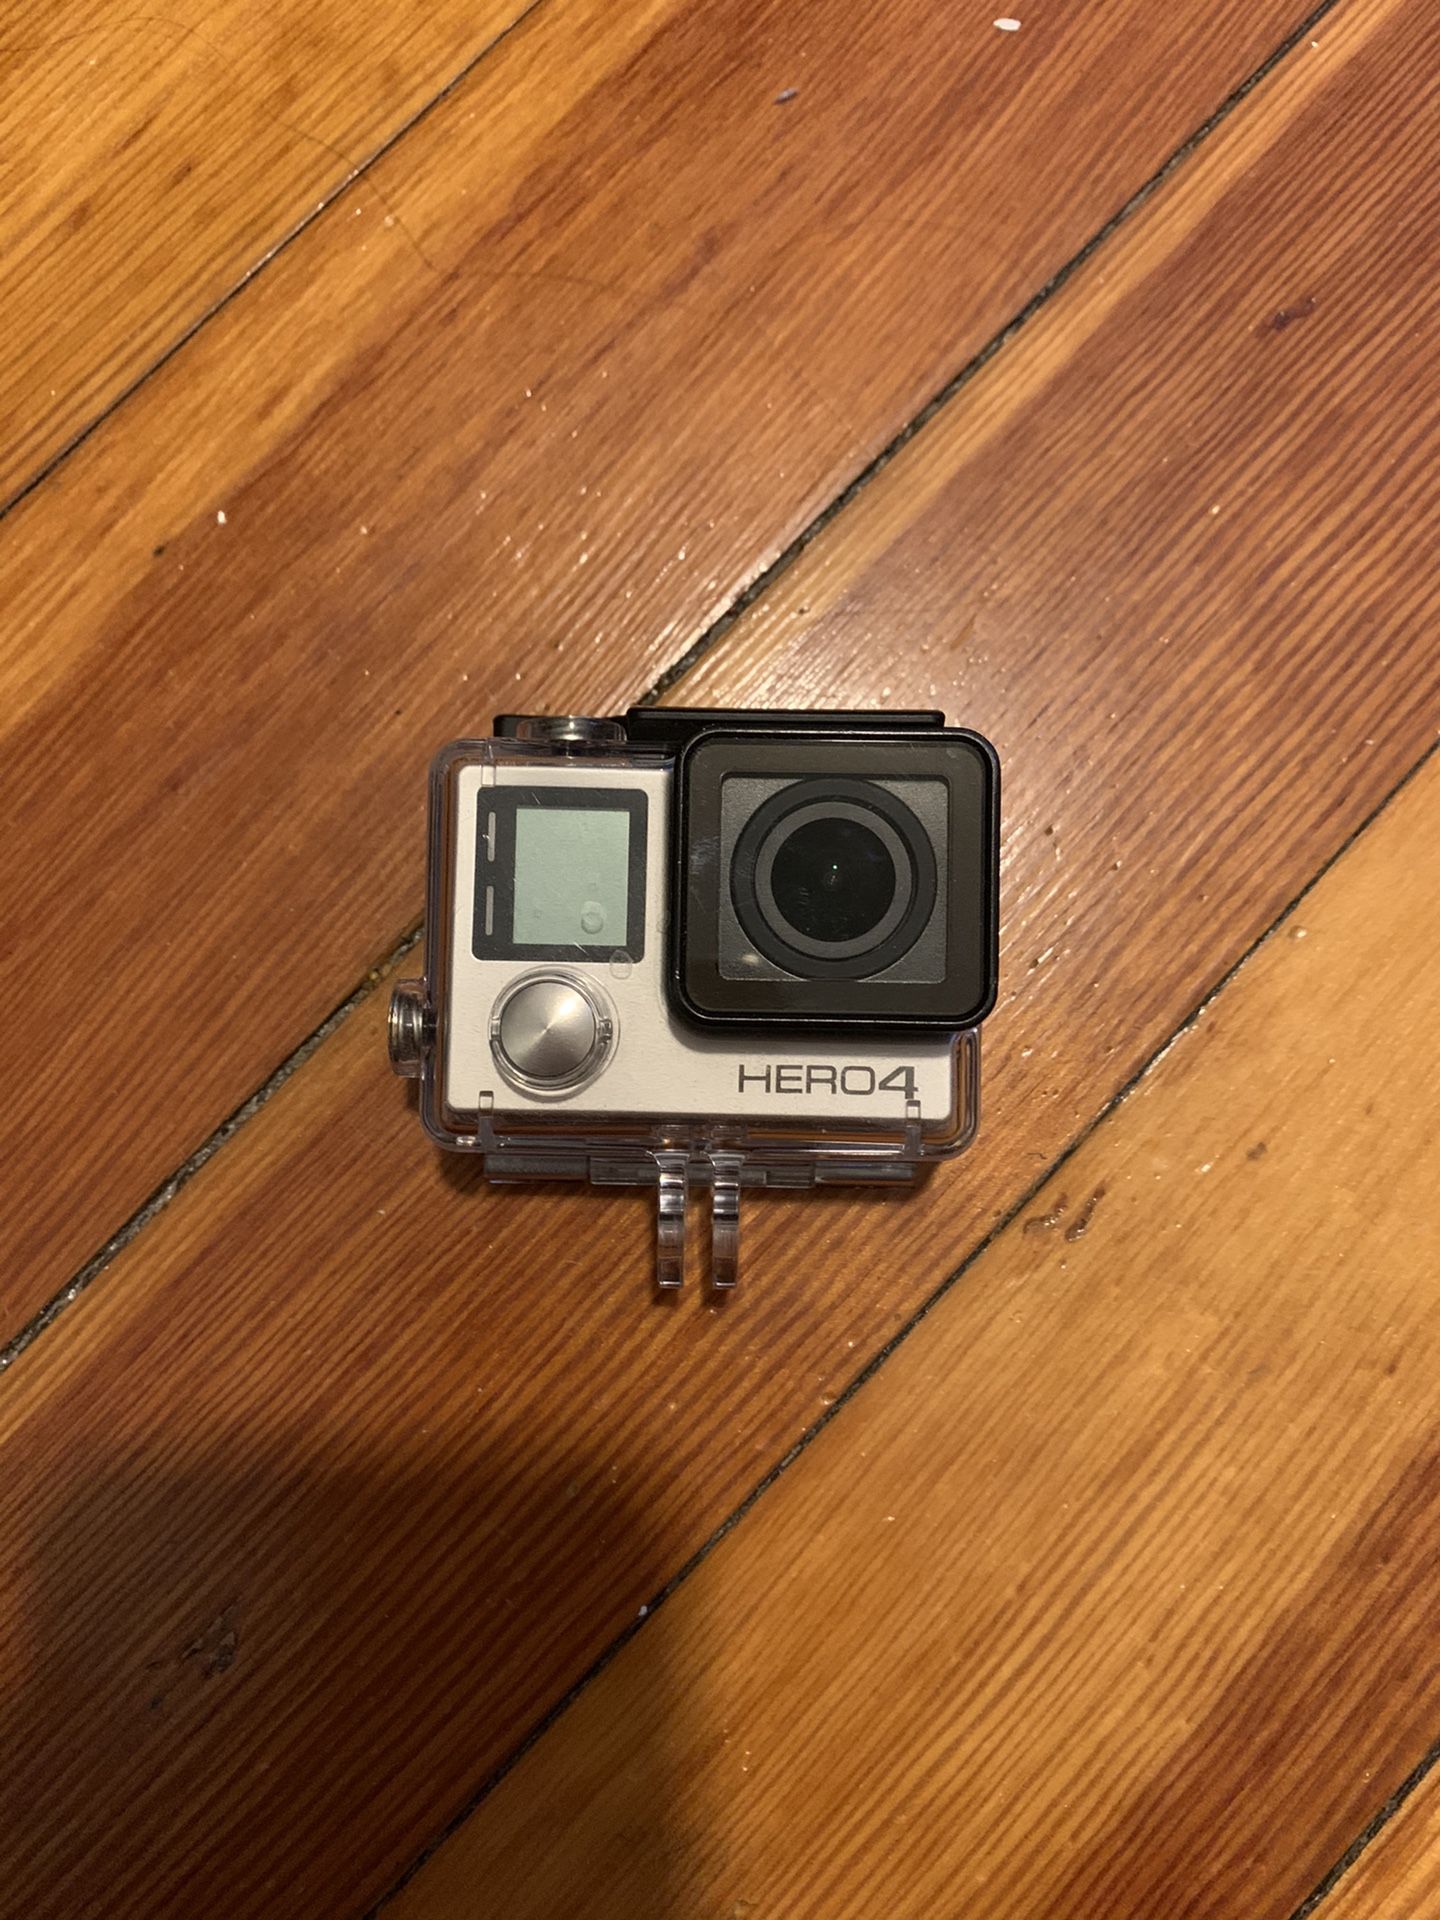 GoPro Hero 4 Silver and Feiyu G4 Gimbal 3 axis Stabilizer (accessories included)